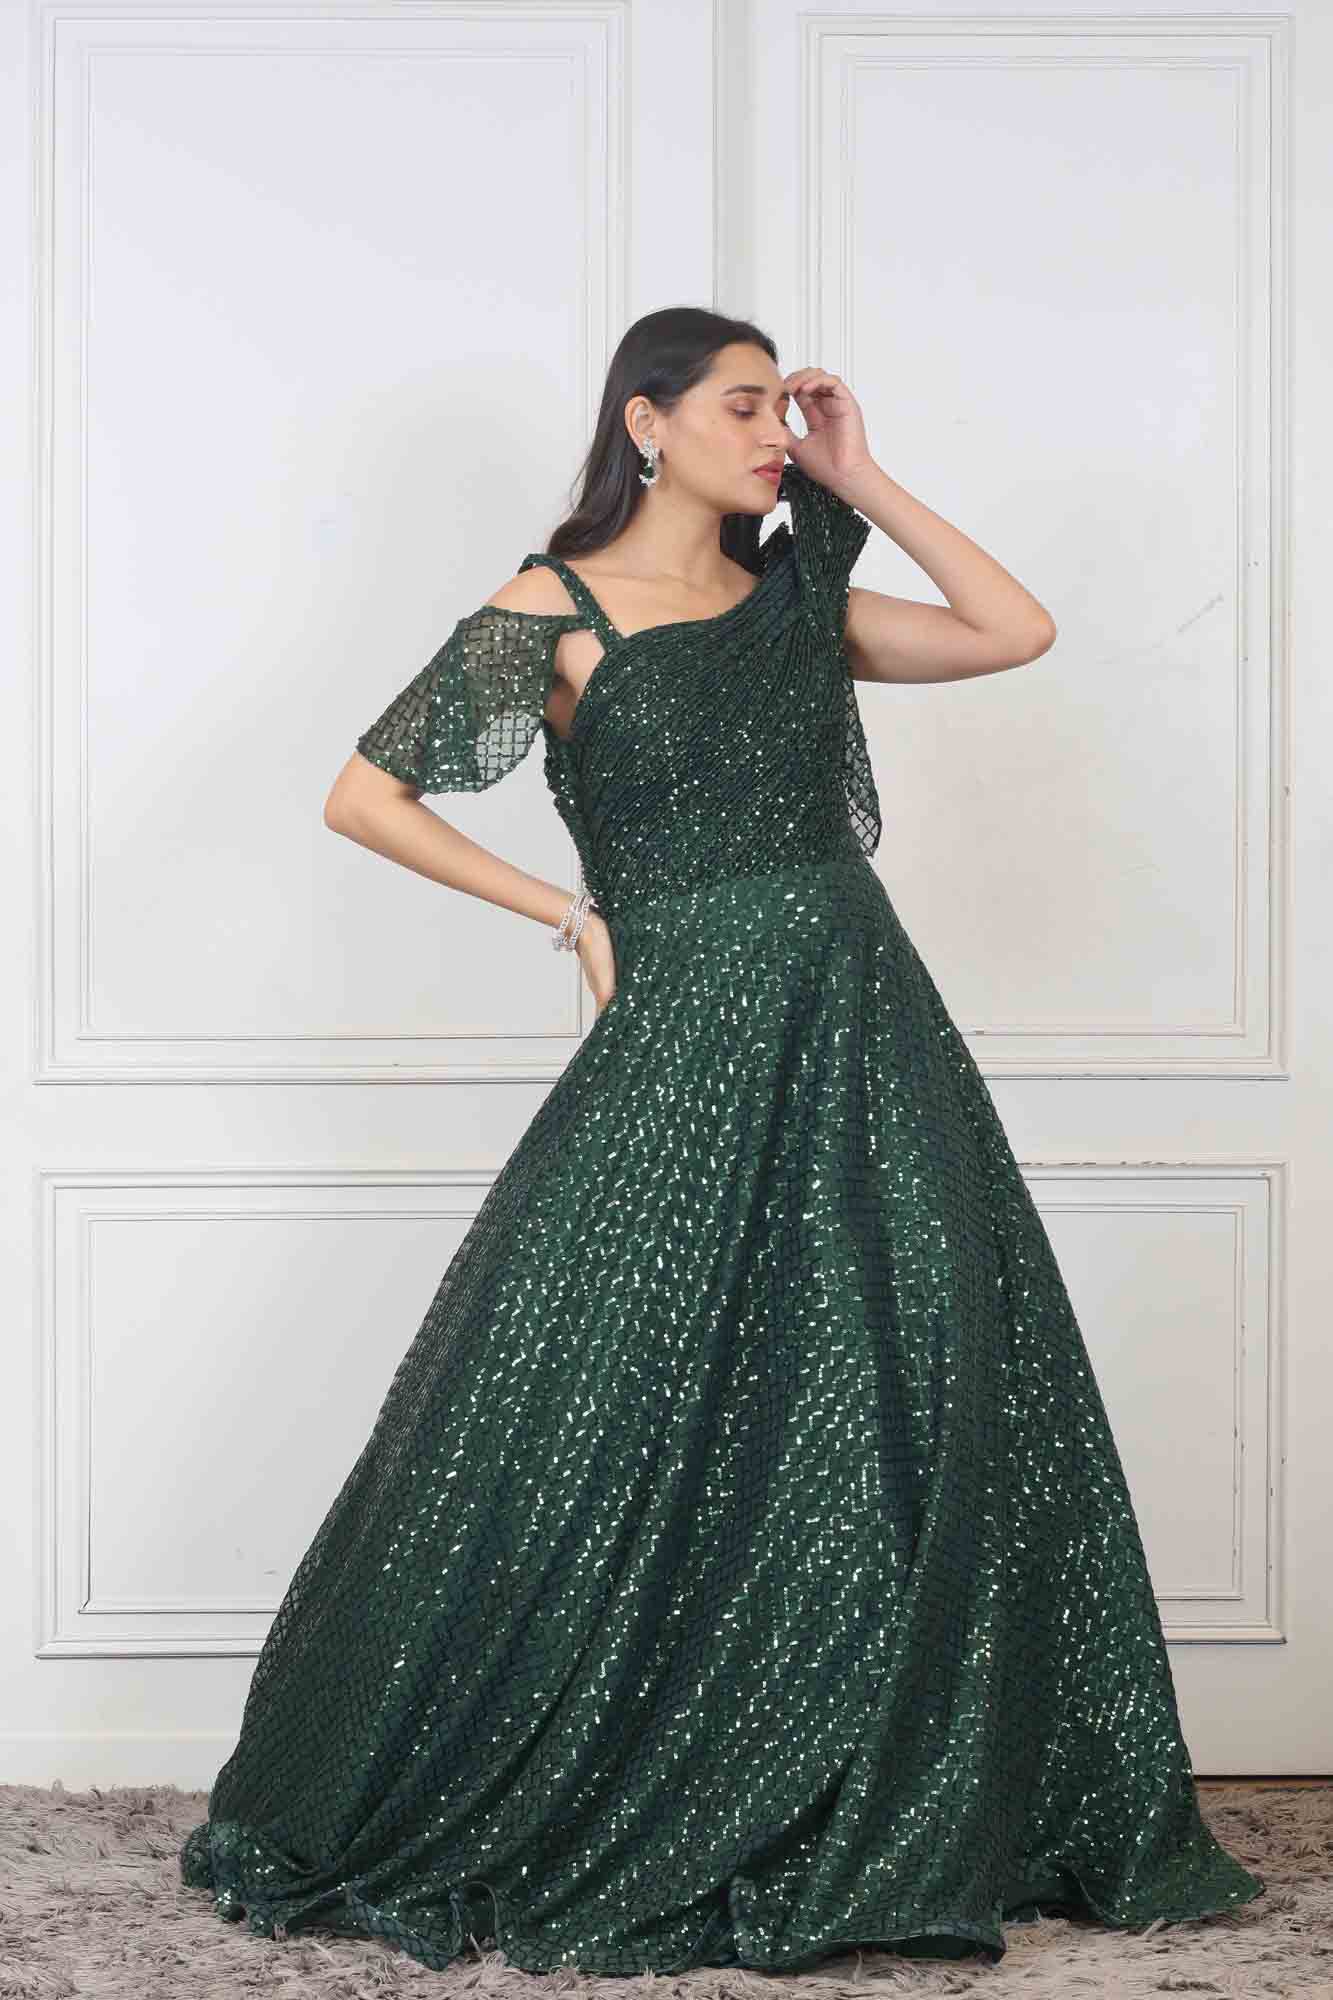 Buy Black Faux Georgette Embroidered Dresses and Gown Party Wear Online at  Best Price | Cbazaar